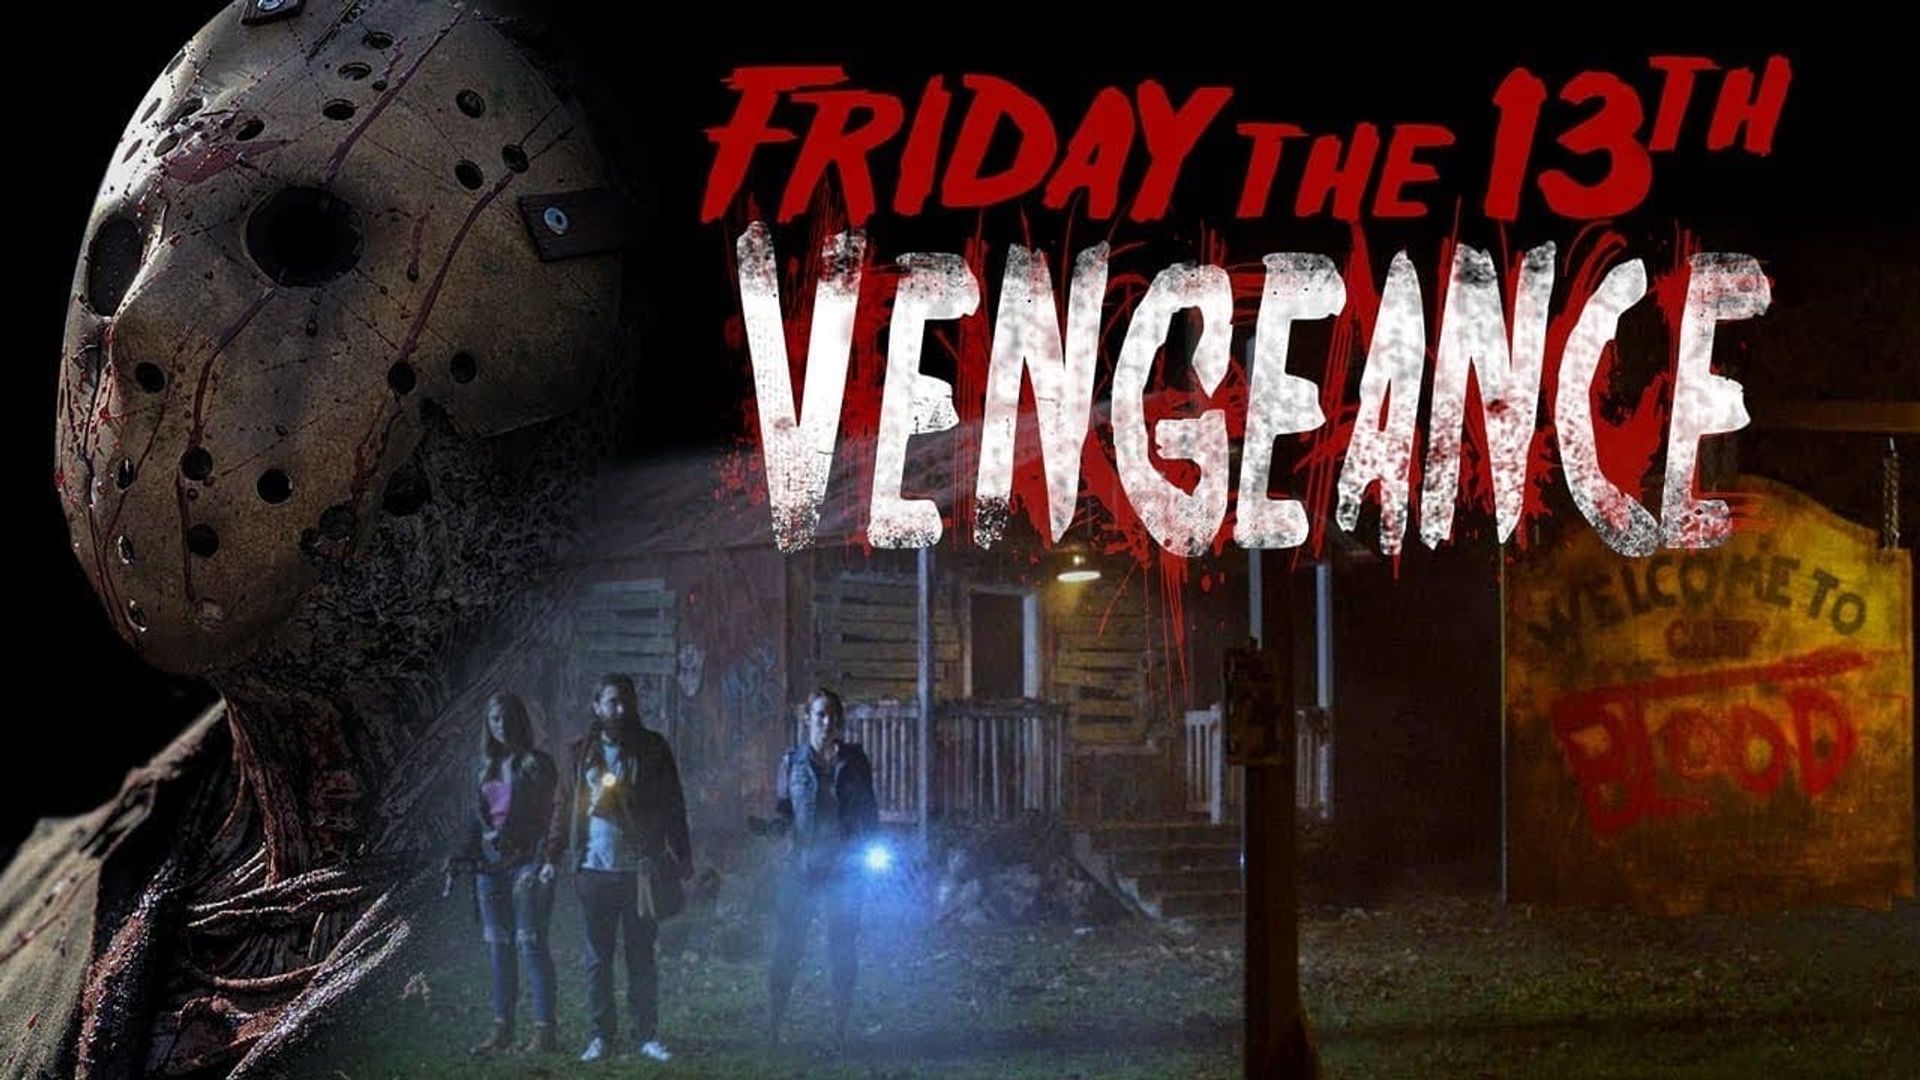 Friday the 13th: Vengeance background